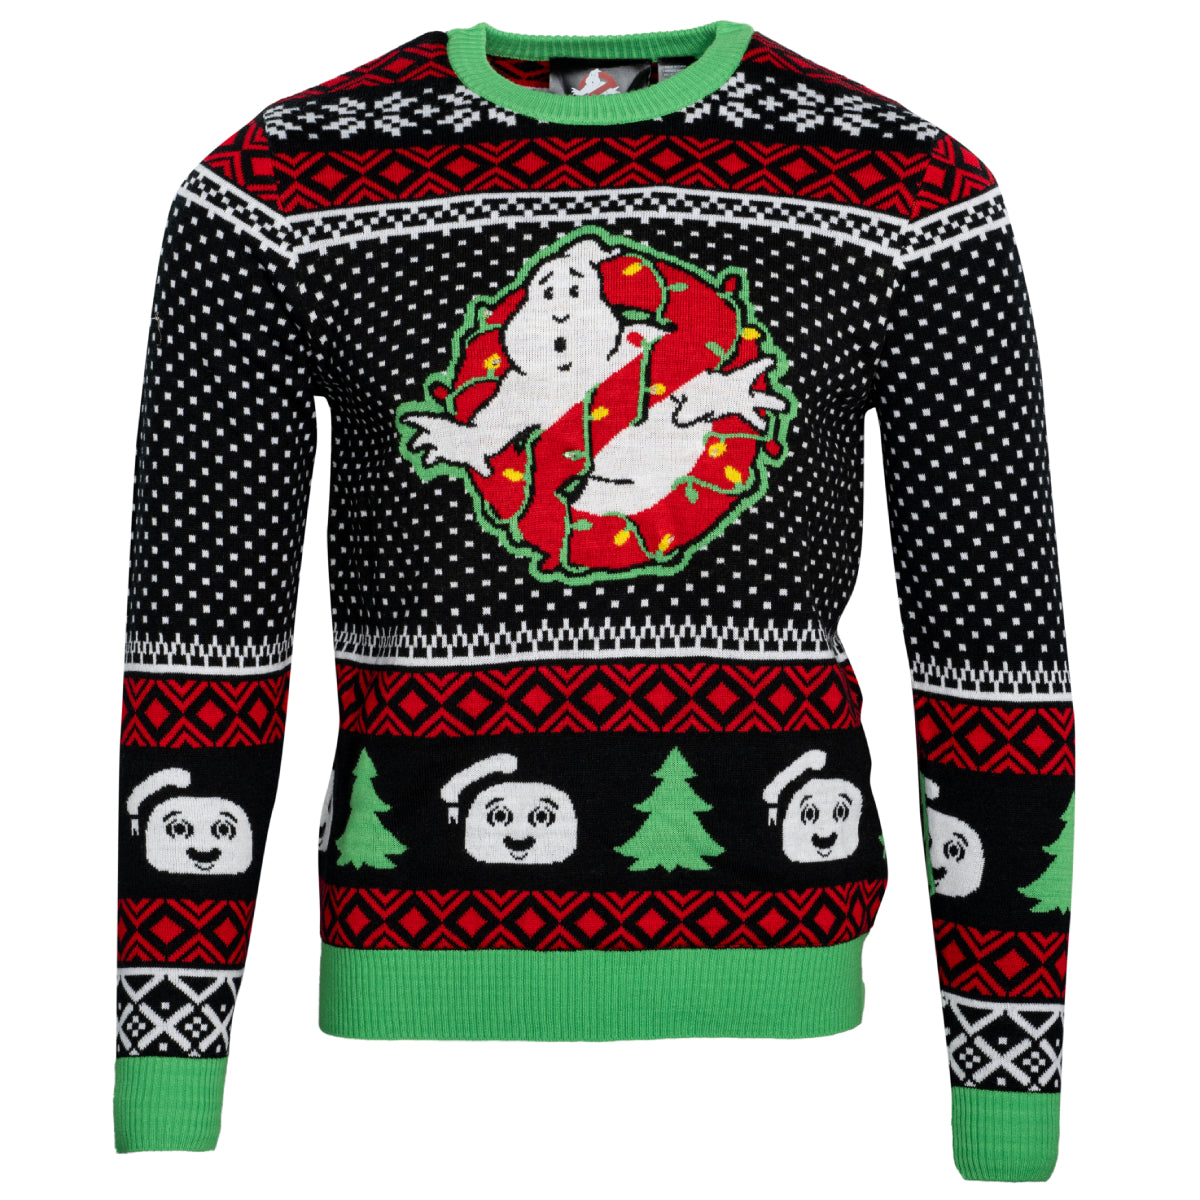 Ghostbusters Lights Sweater